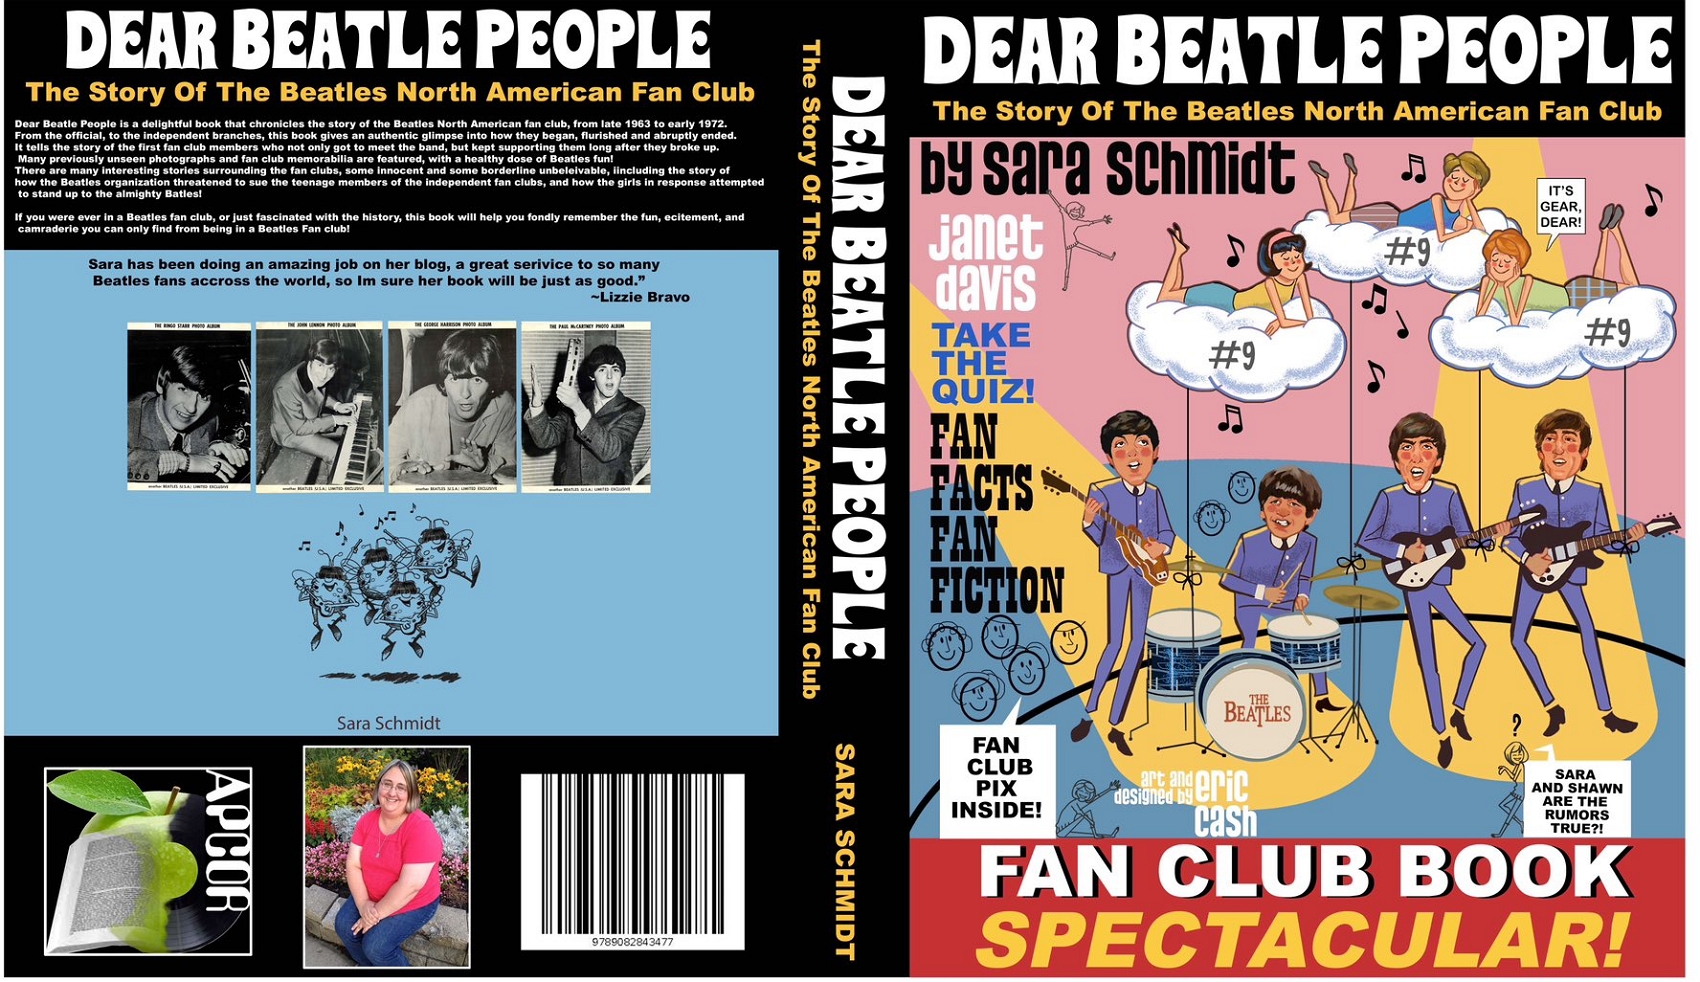 Premiere For The New Beatles Fan Club Book, Dear Beatle People, will be at The Fest For Beatles Fans in Jersey City, NJ, March 31 through April 2, 2023